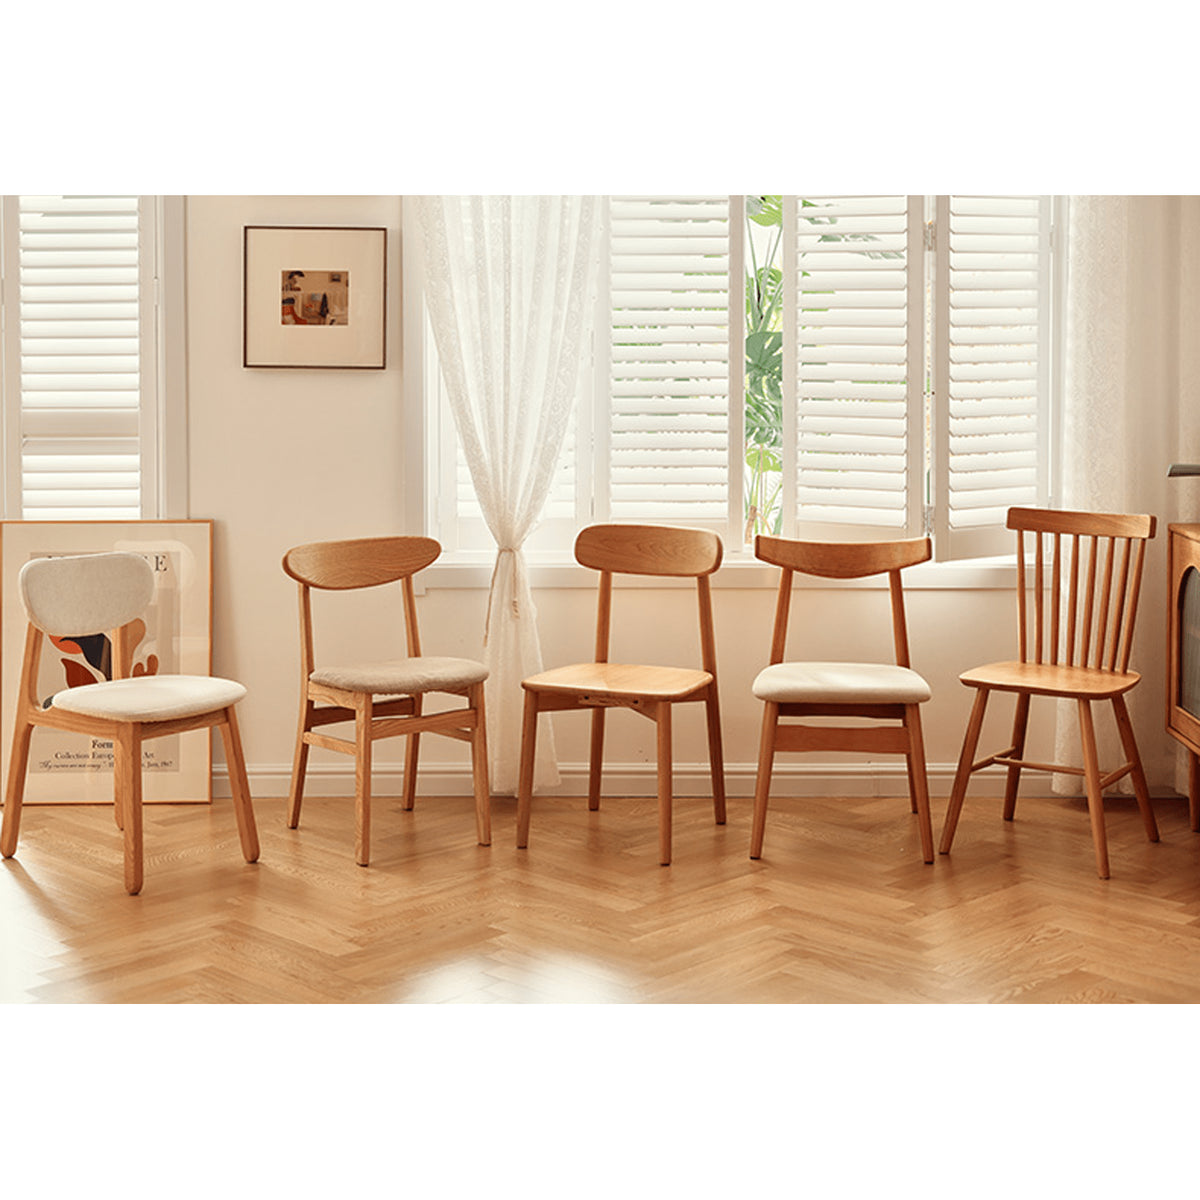 Elegant Red Oak Wood Chair with Natural Finish and Comfortable Cotton Seat fyg-659